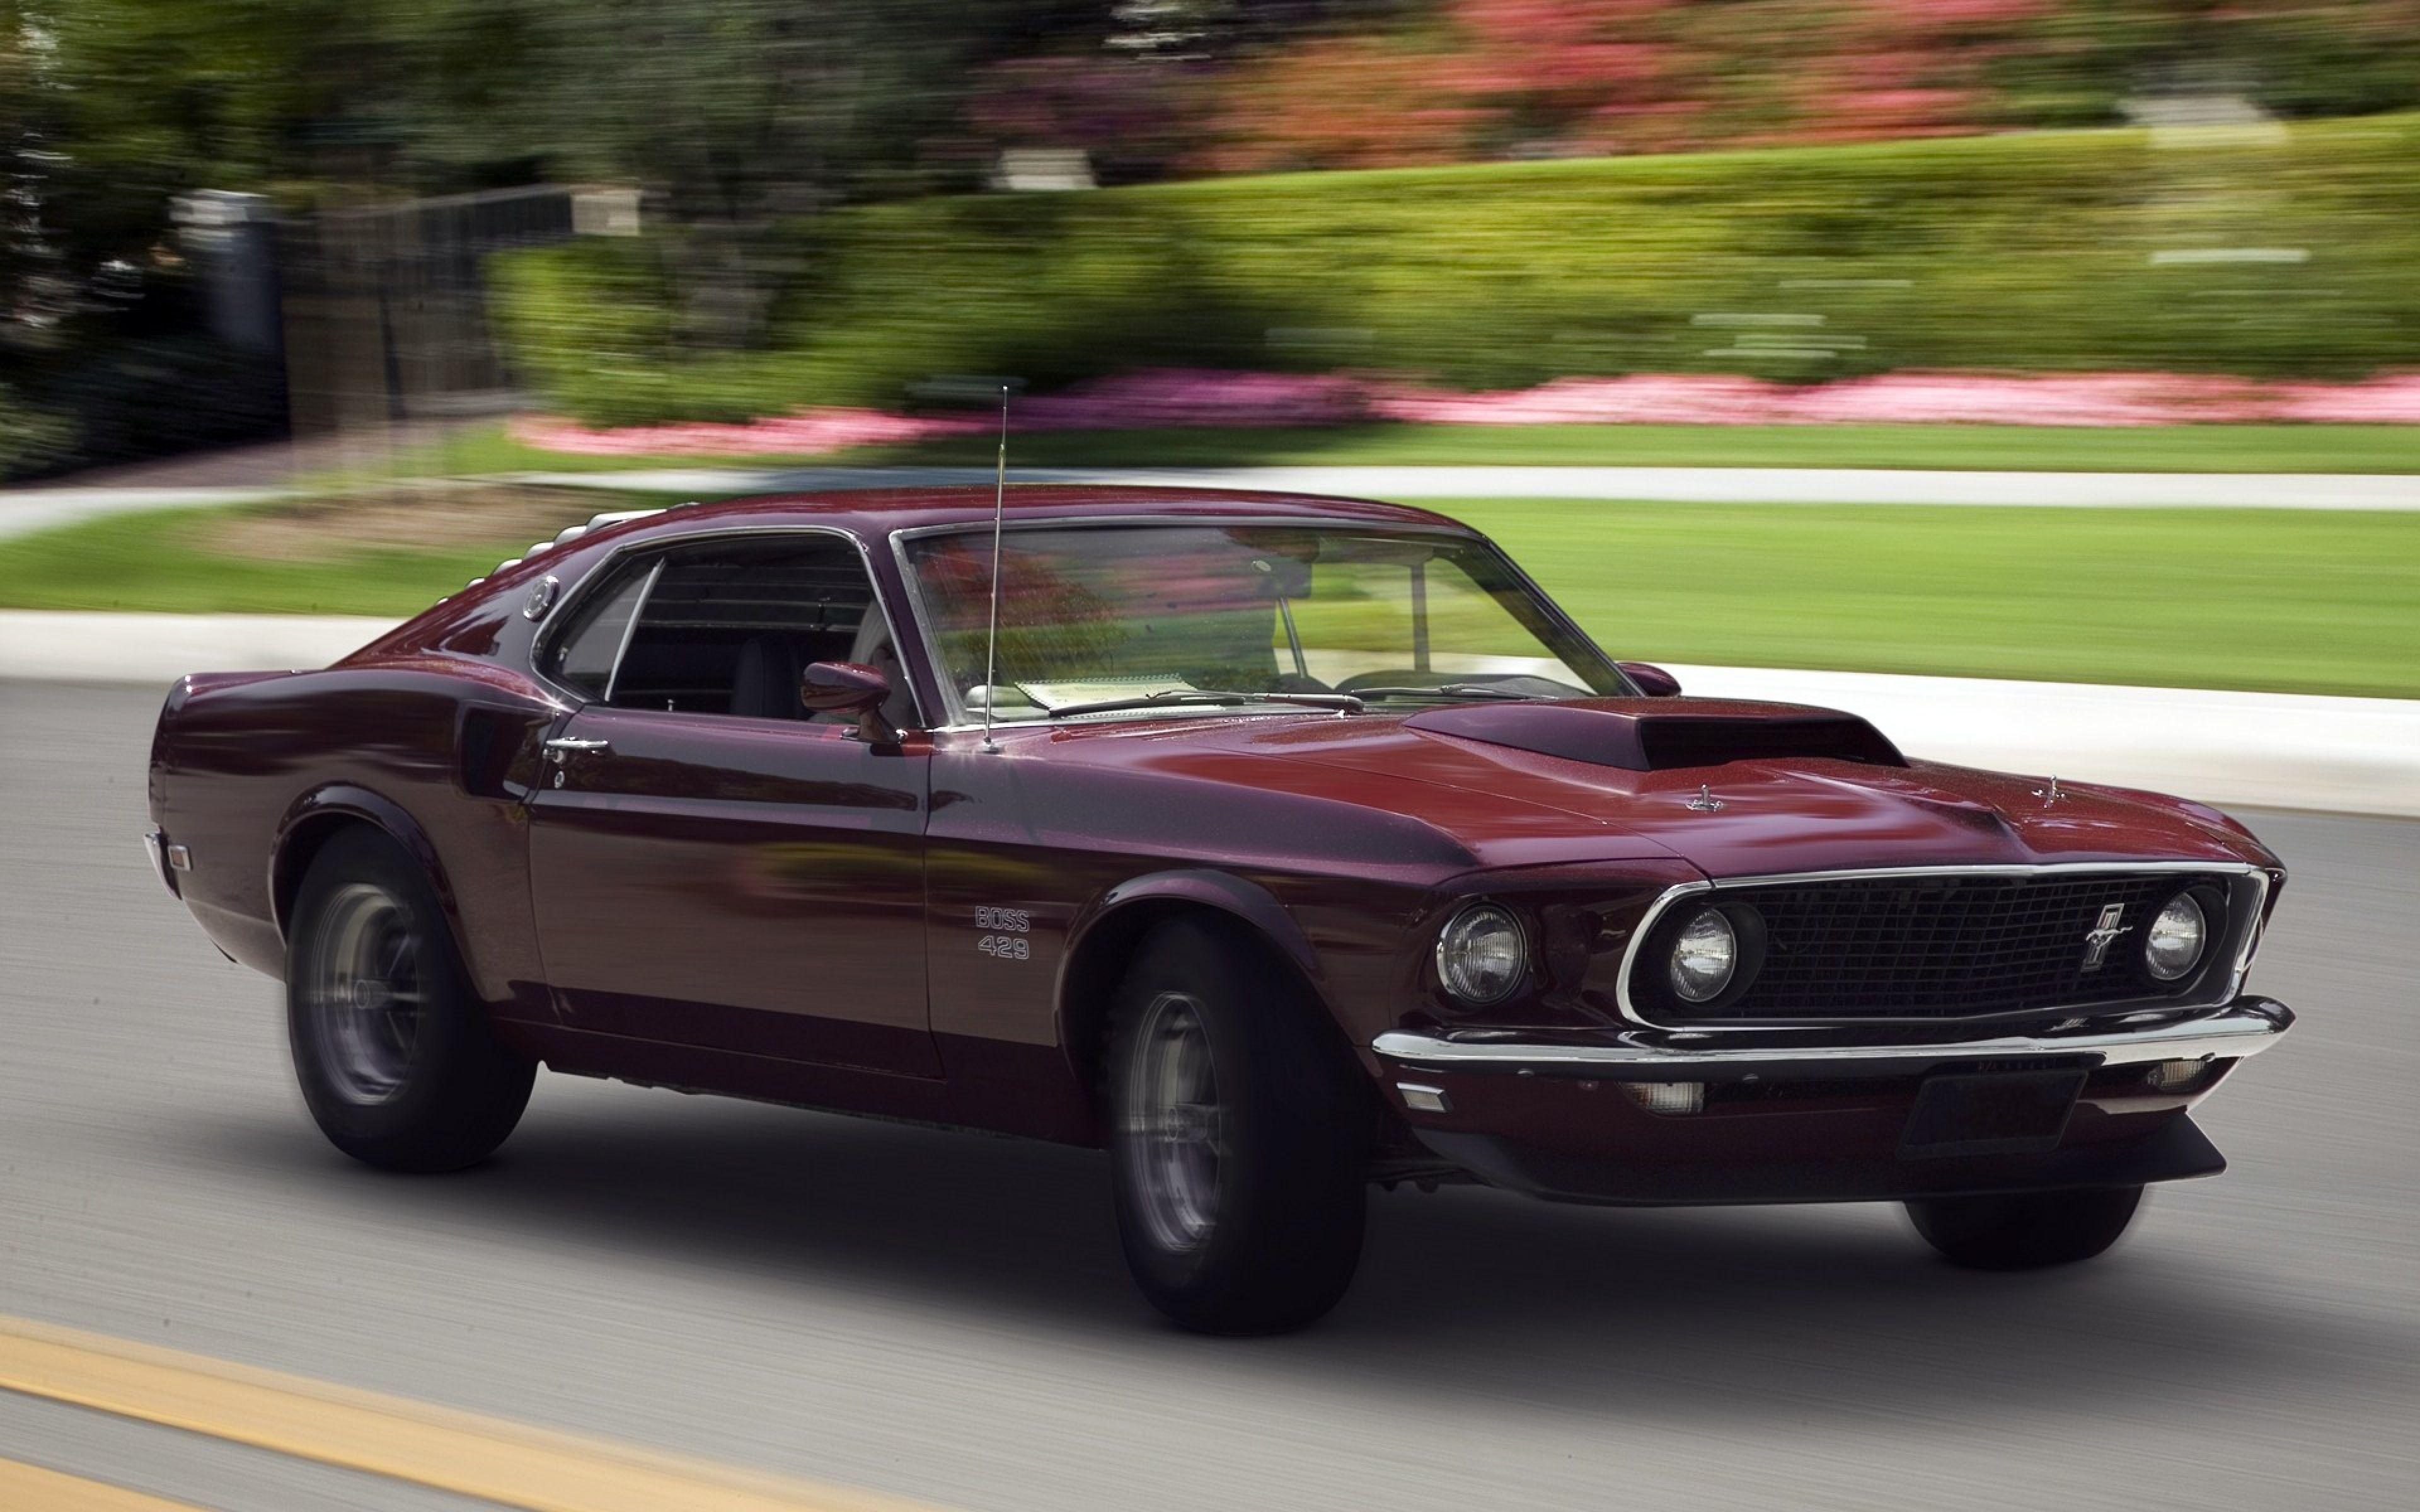 Download Wallpaper 3840x2400 Muscle car, Ford boss, 429